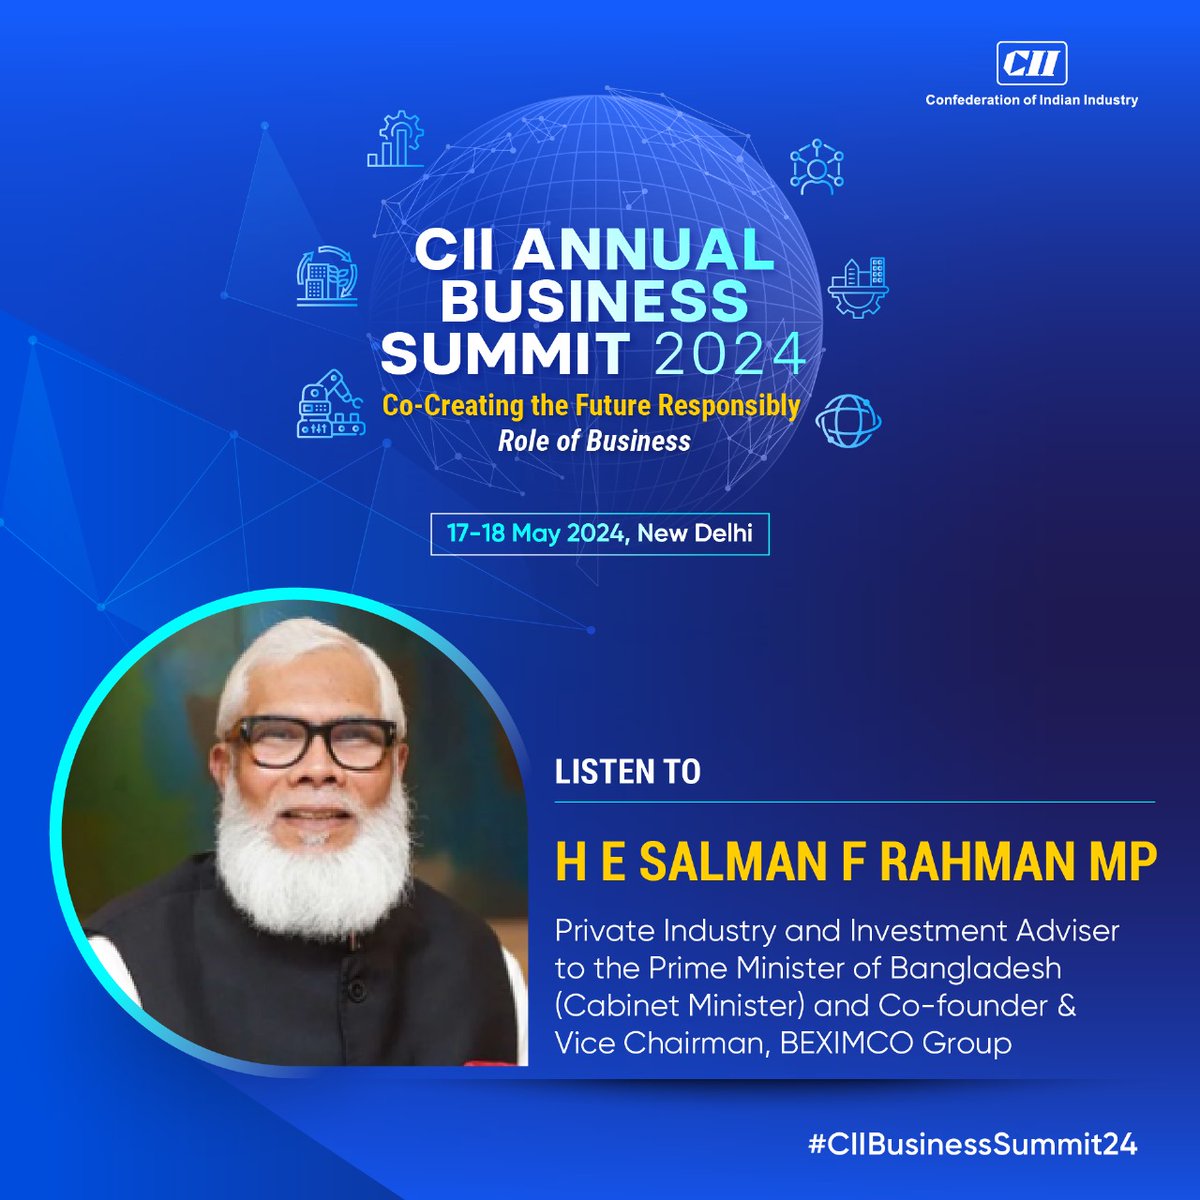 H E @SalmanFRahmanMP, Private Industry and Investment Adviser to the Prime Minister of Bangladesh (Cabinet Minister) and Co-founder & Vice Chairman, @Beximco_Group shares views at the CII Annual Business Summit 2024! Thought leaders and experts get together to discuss the future